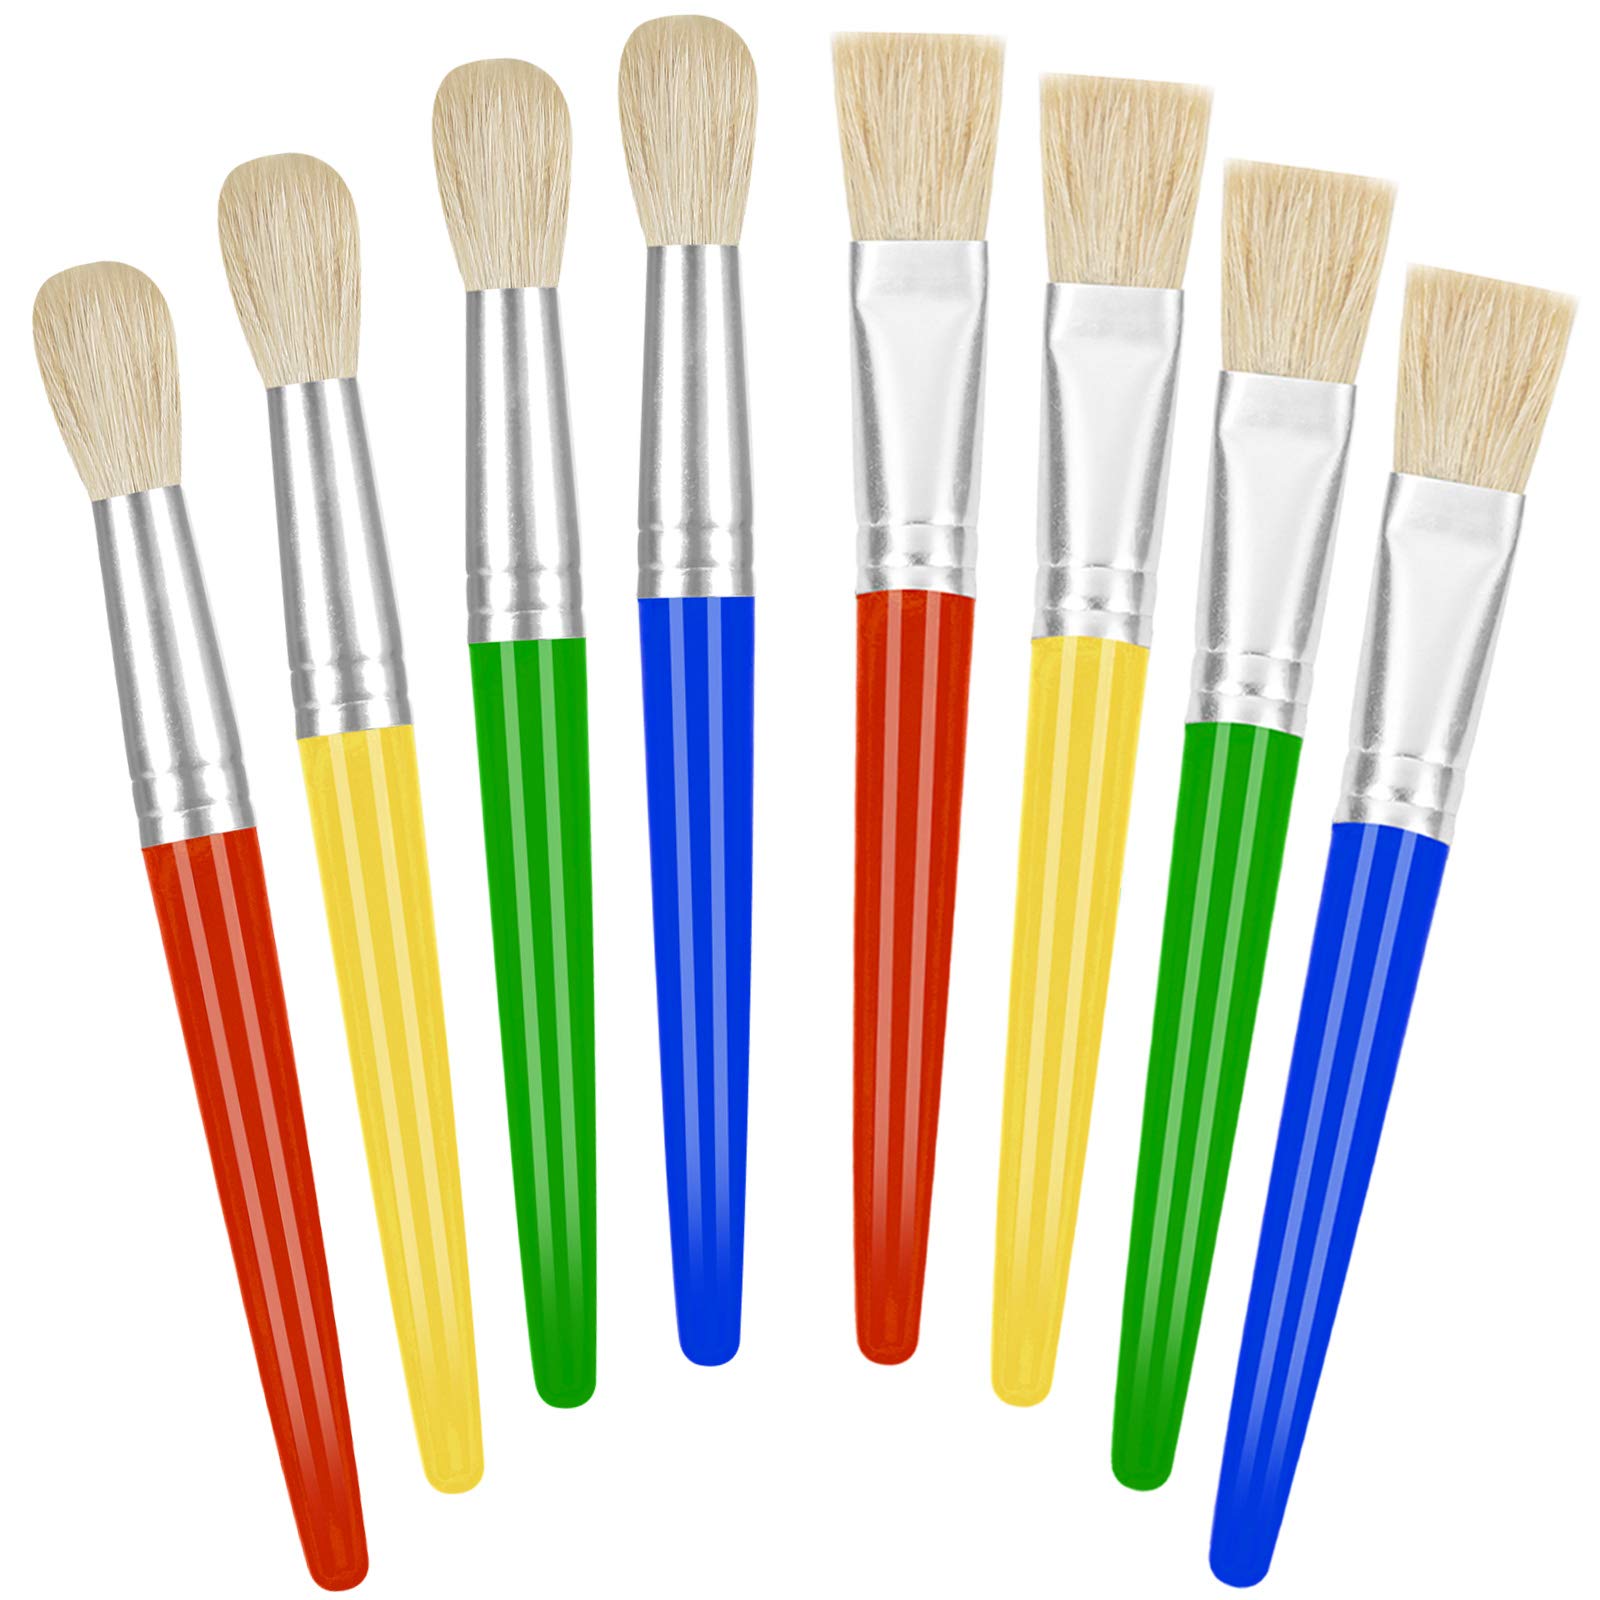 Paint Brushes for Kids, 8 Pcs Big Washable Chubby Toddler Paint Brushes, Easy to Clean & Grip Round and Flat Preschool Paint Brushes with No Shed Bristle for Acrylic Paint, Washable Paint